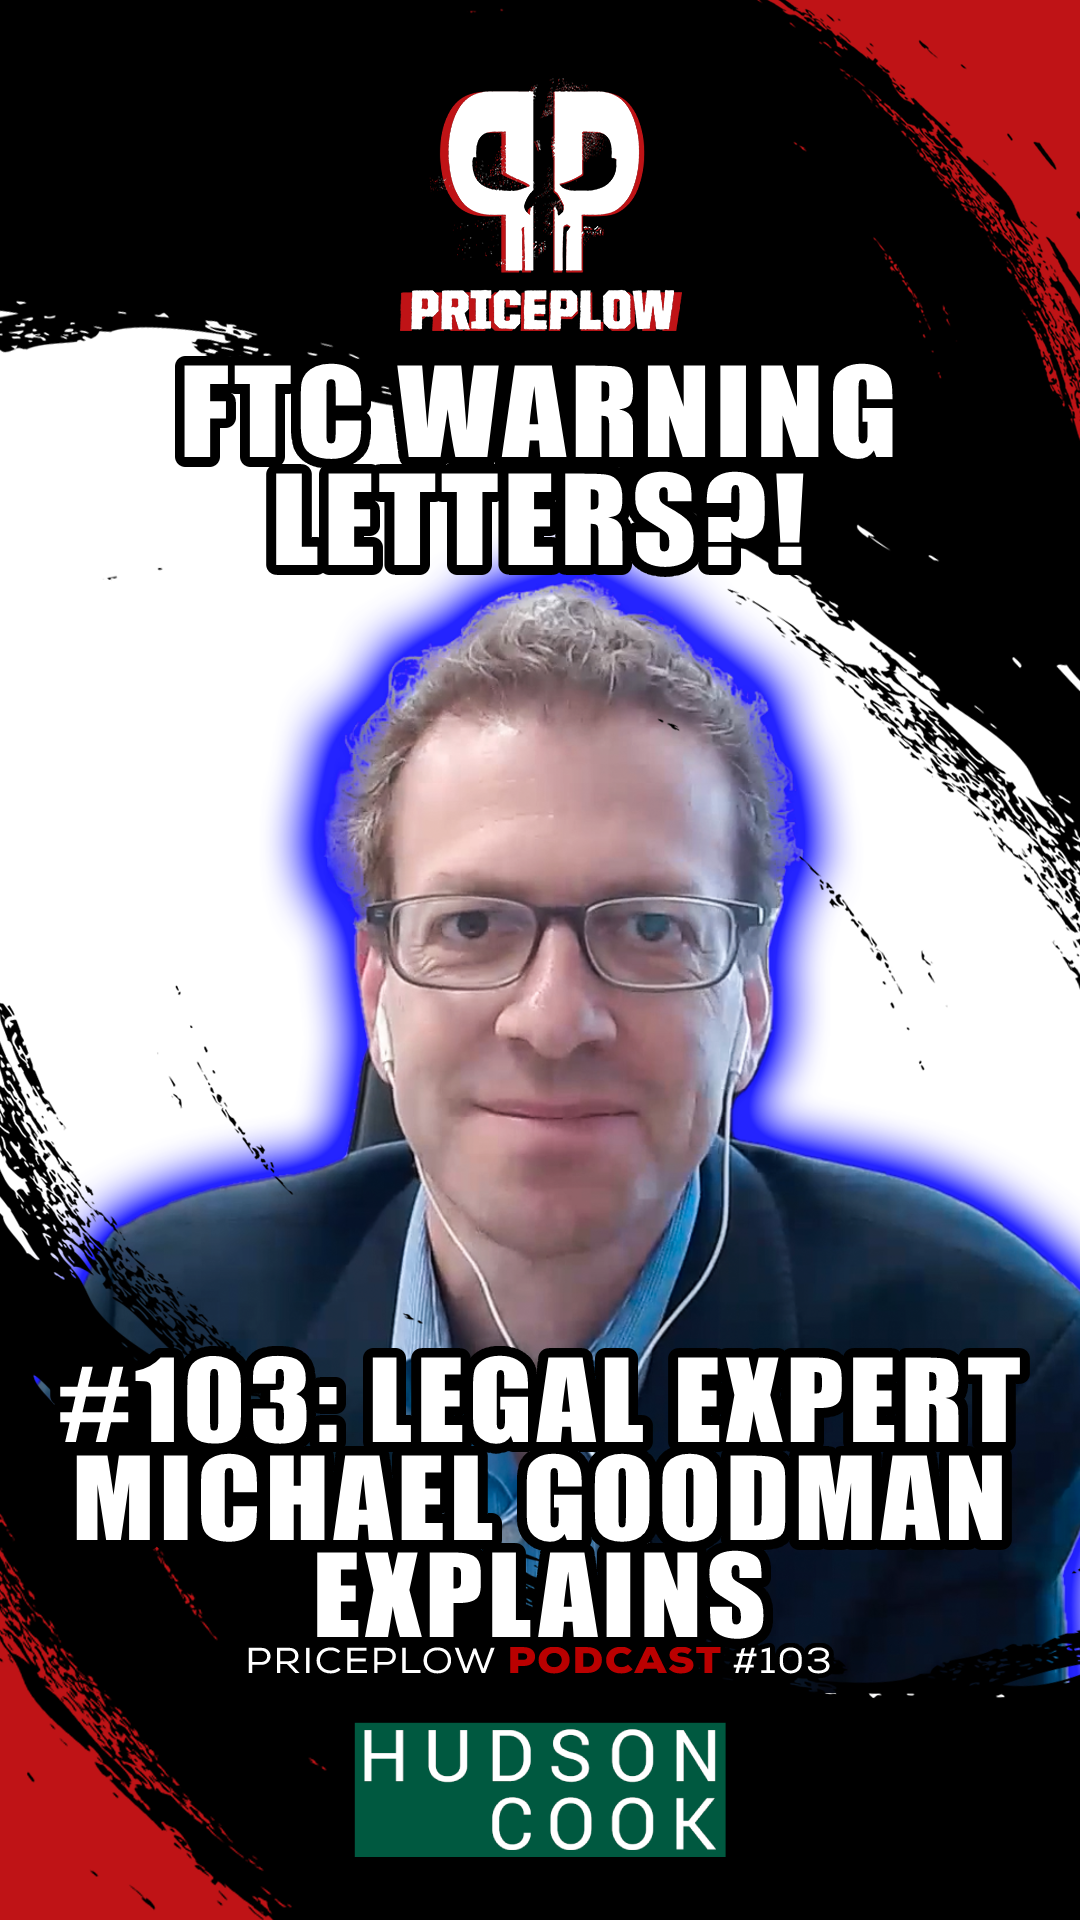 Michael Goodman: FTC Legal Expert / Lawyer at Hudson Cook LLP Explains the FTC's 2023 Warning Letters to 700 Brands